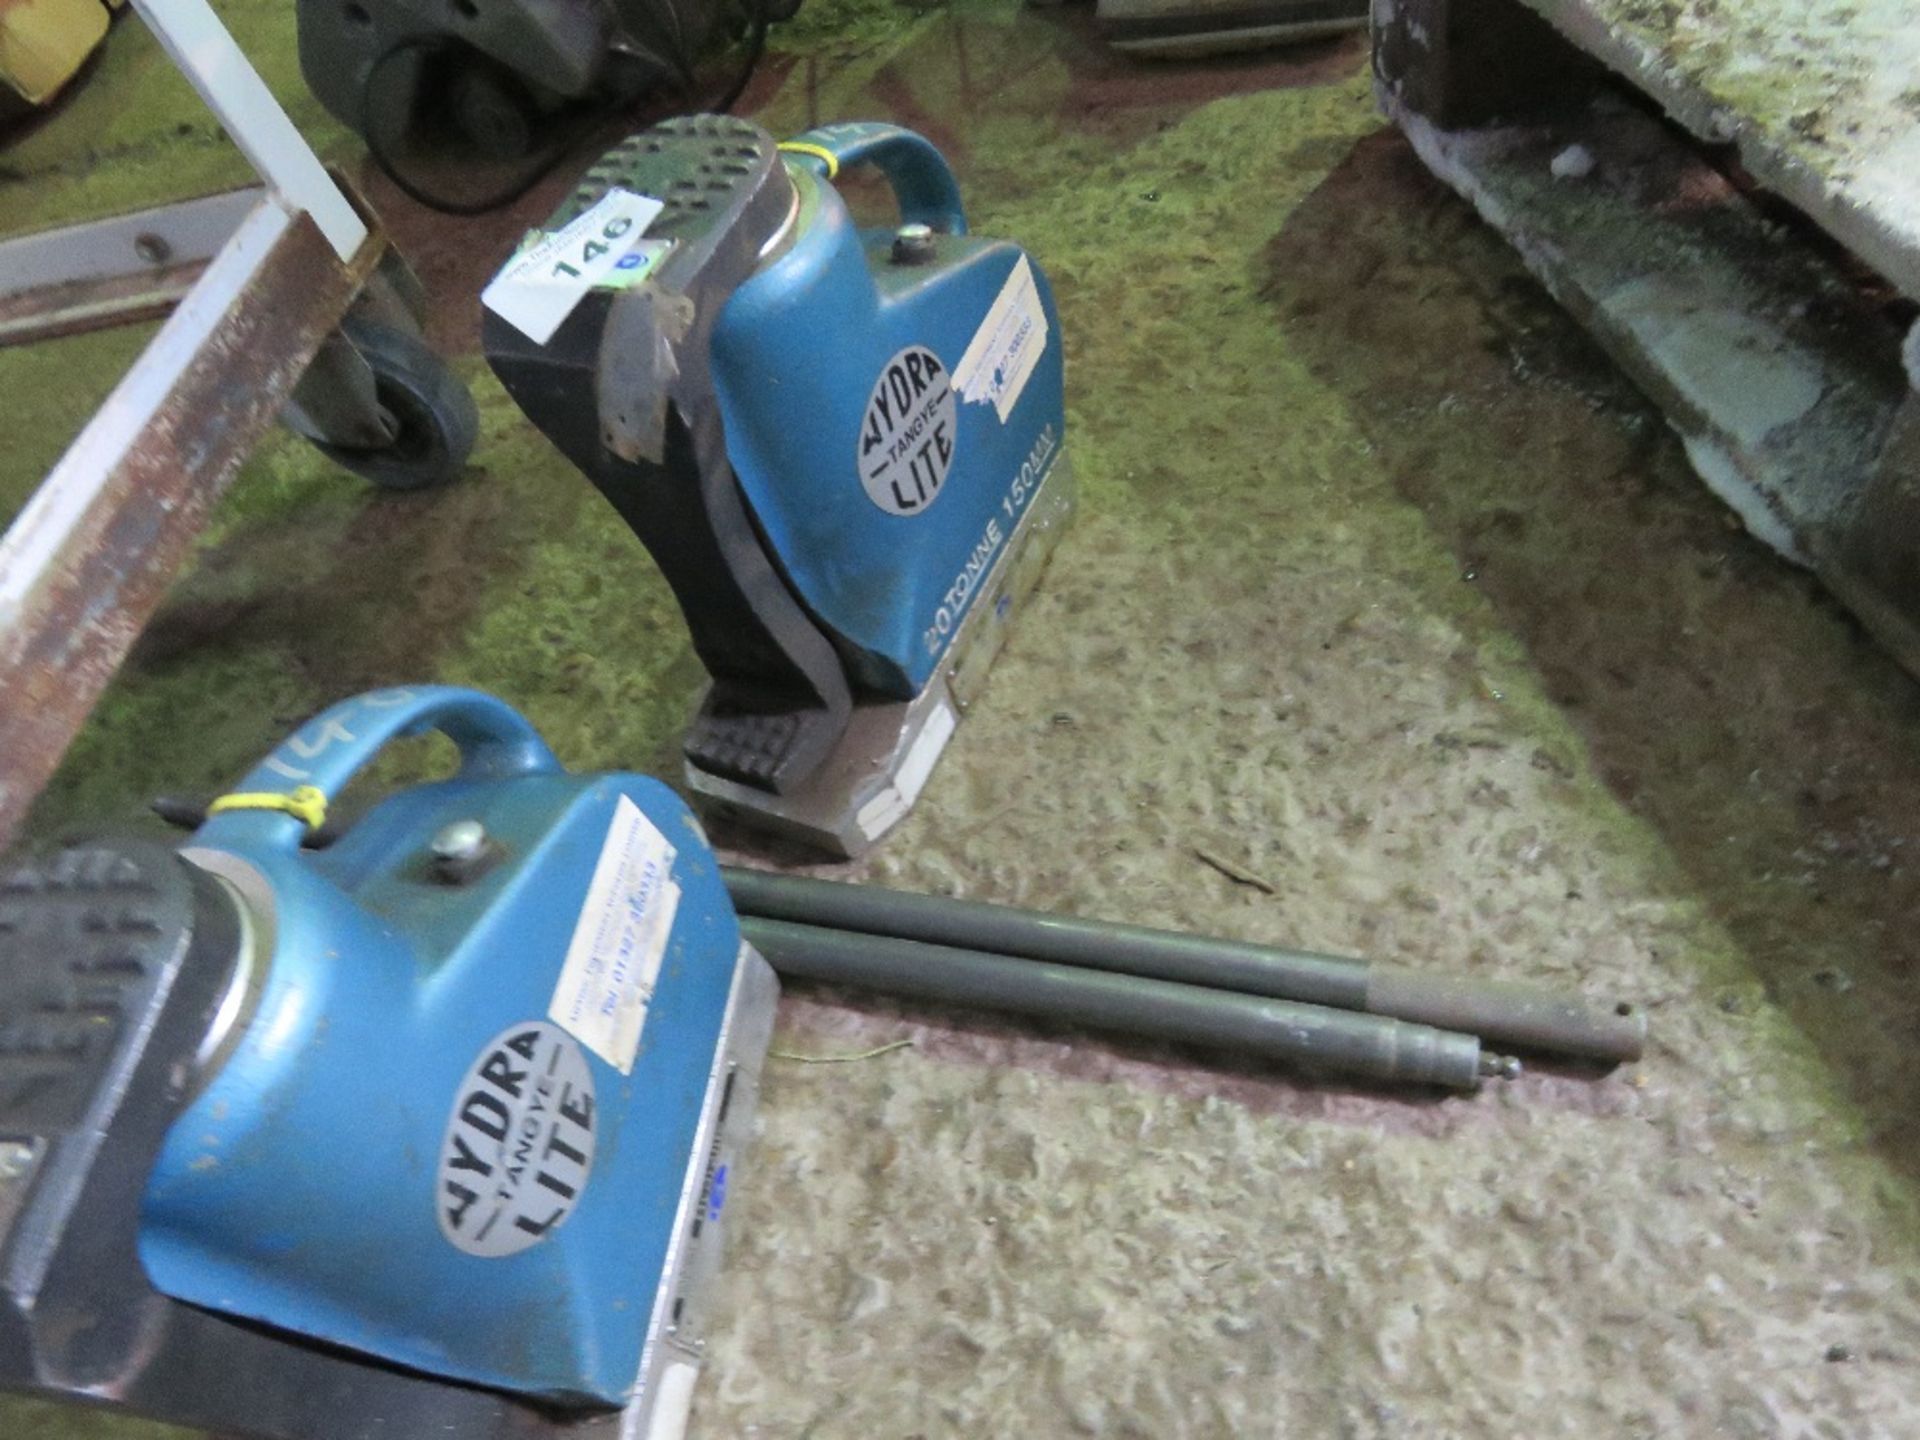 2 X HYDRALITE TANGYE 20TONNE HYDRAULIC JACKS, 150MM RATED LIFT WITH LEVER BARS. THIS LOT IS SOLD - Image 3 of 3